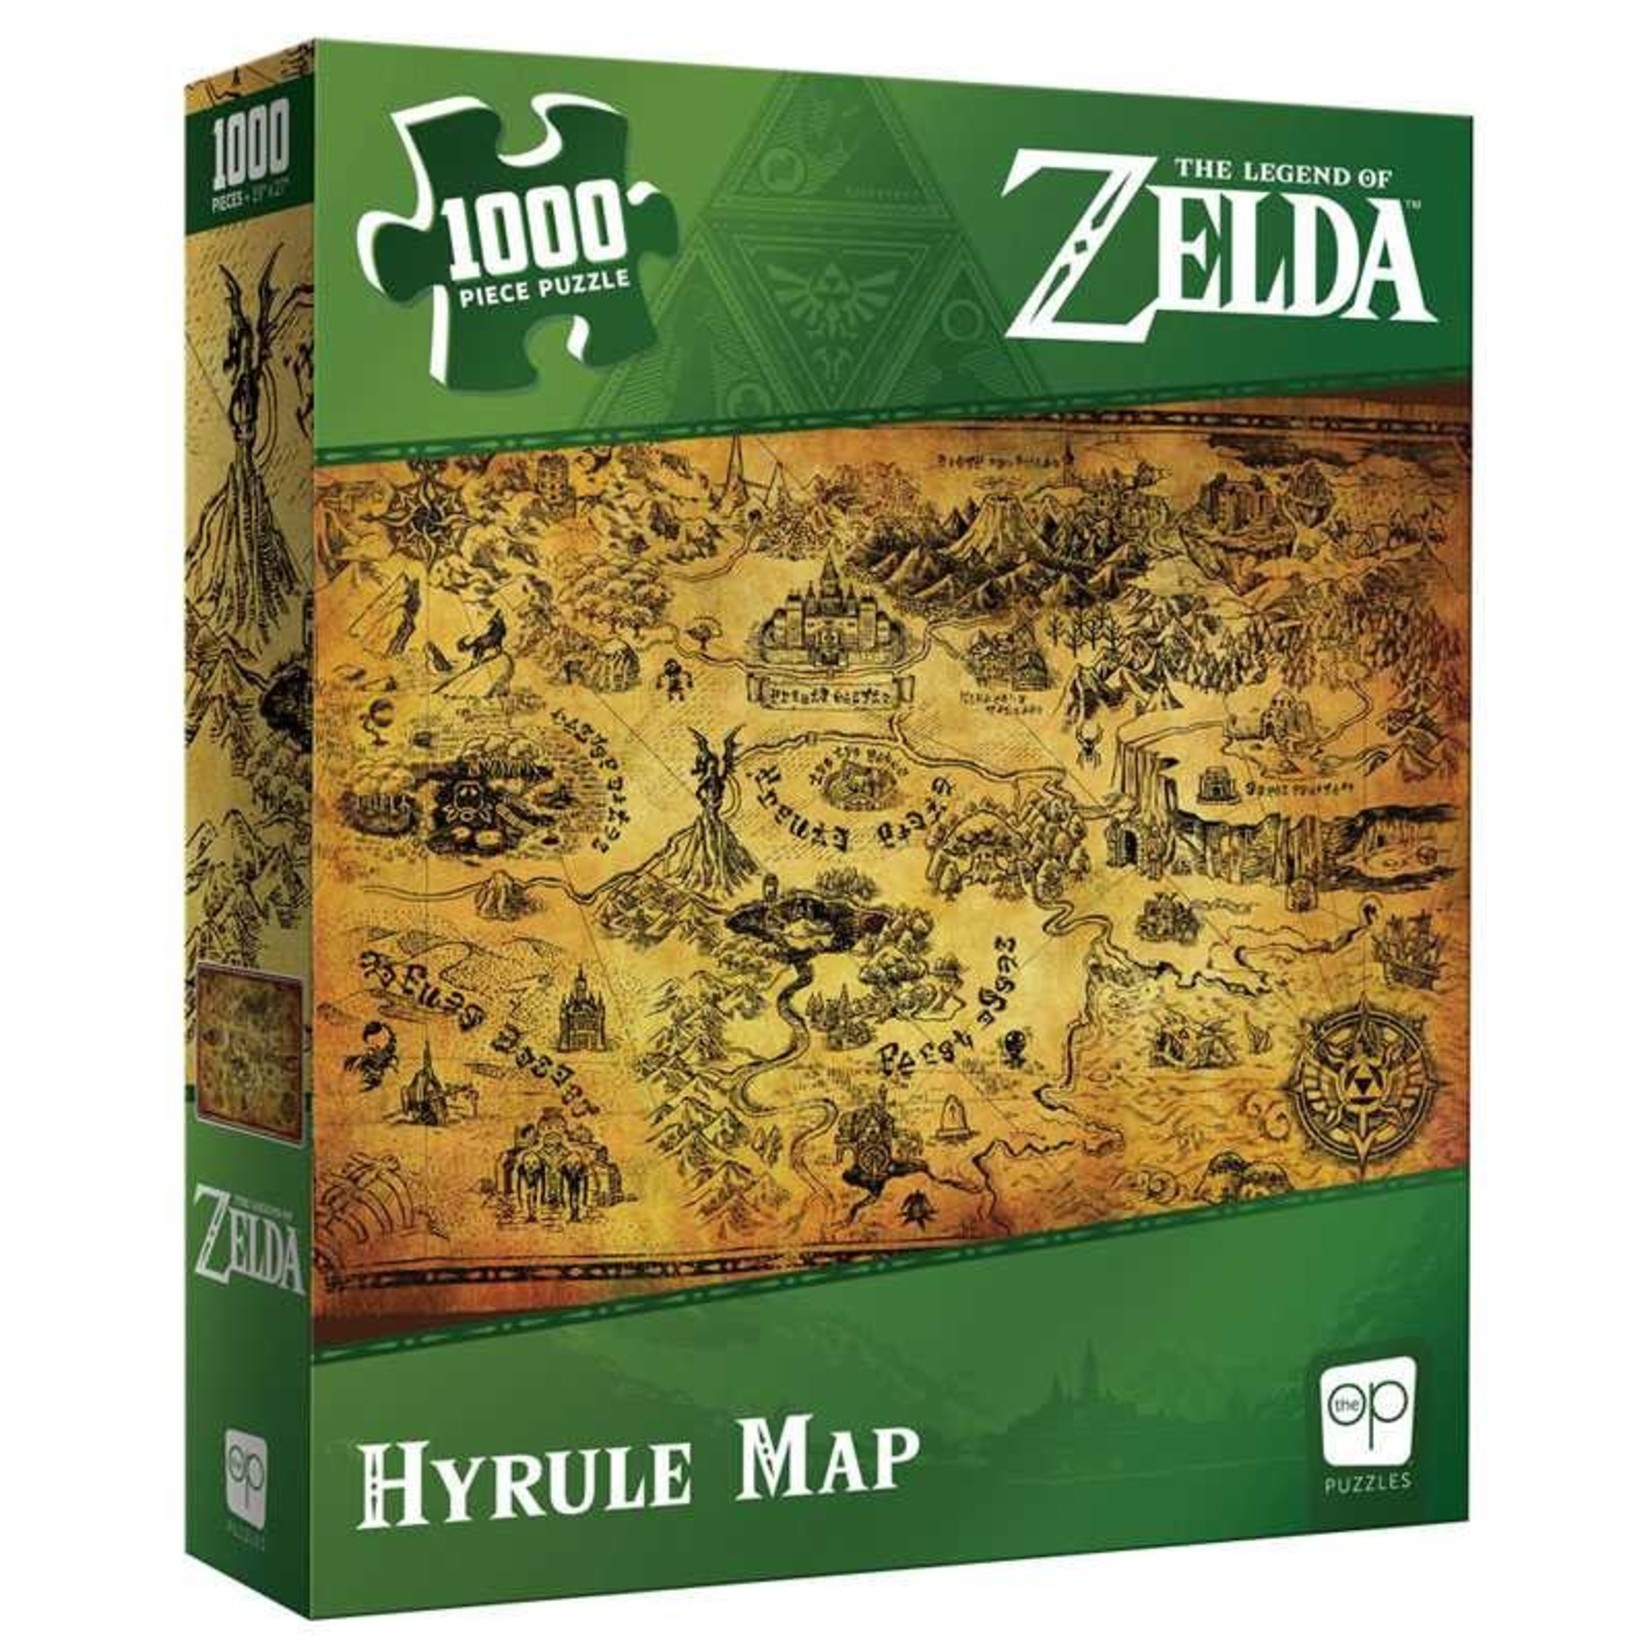 USAopoly 1000 pc Puzzle Zelda Hyrule Map